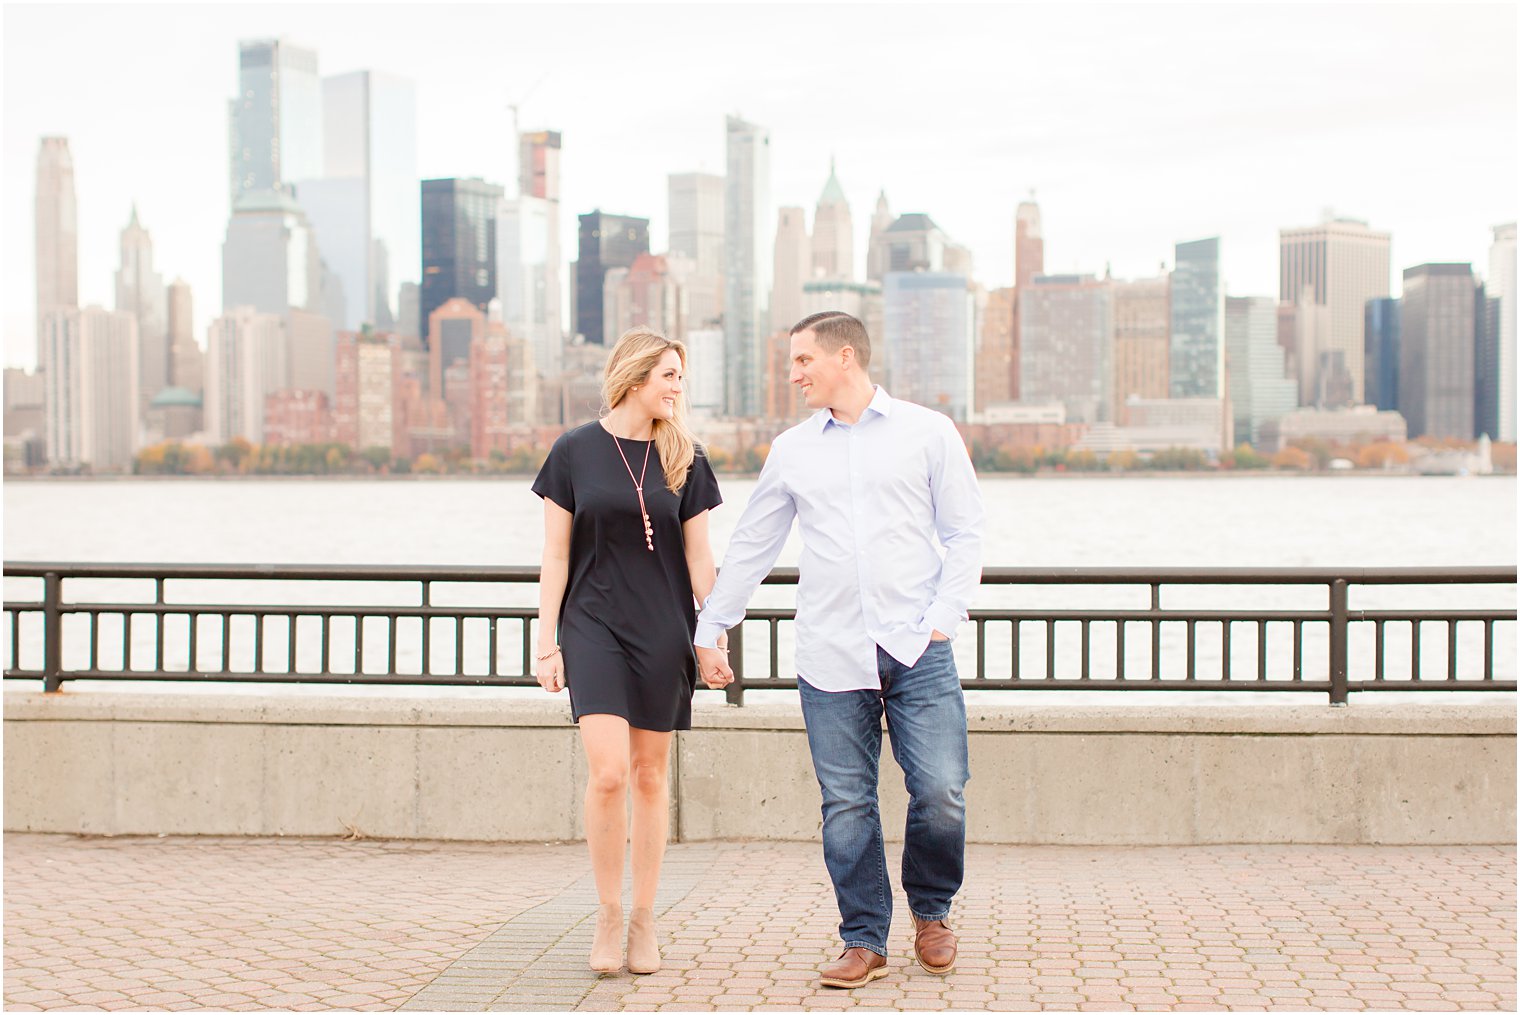 Candid photo during Engagement photos with NYC skyline